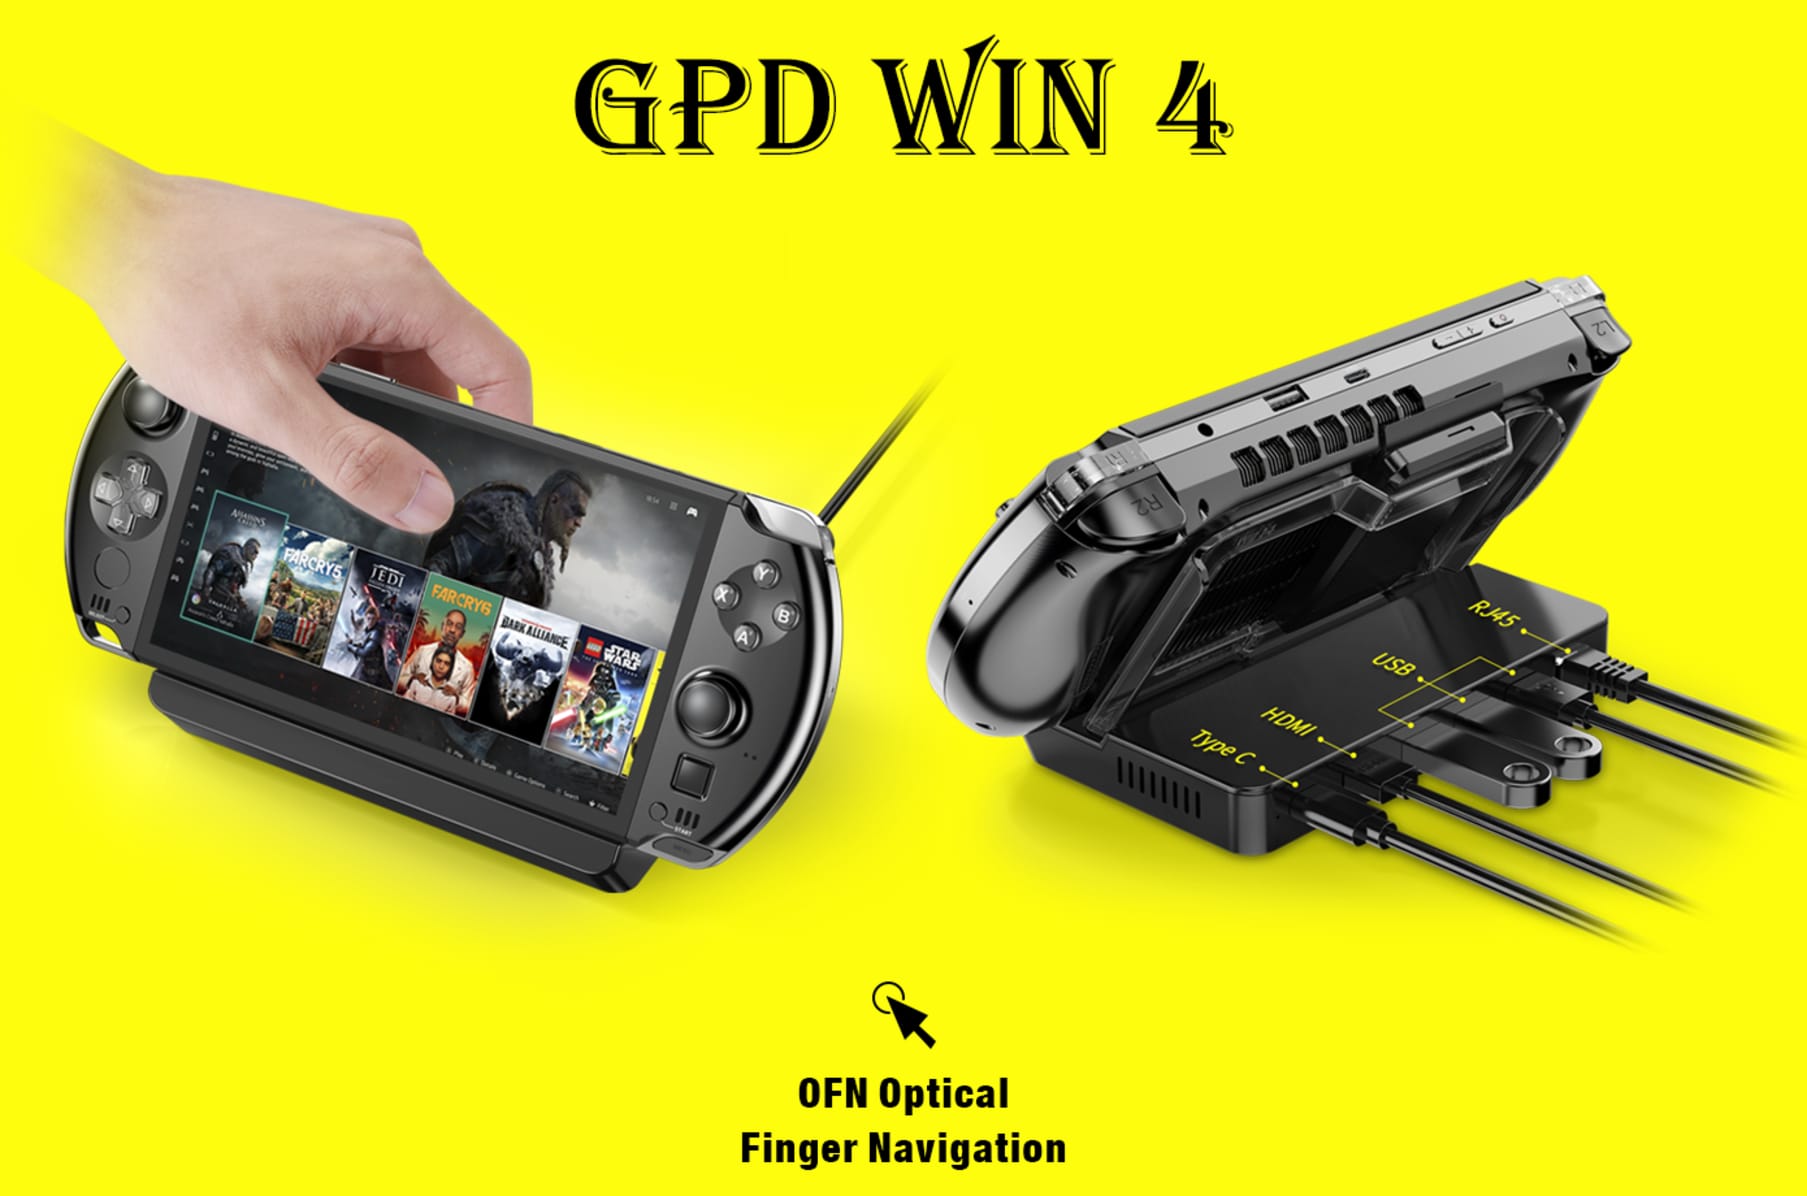 Exploring the GPD WIN Mini: A Review of Shenzhen GPD Technologys Portable Game Controls